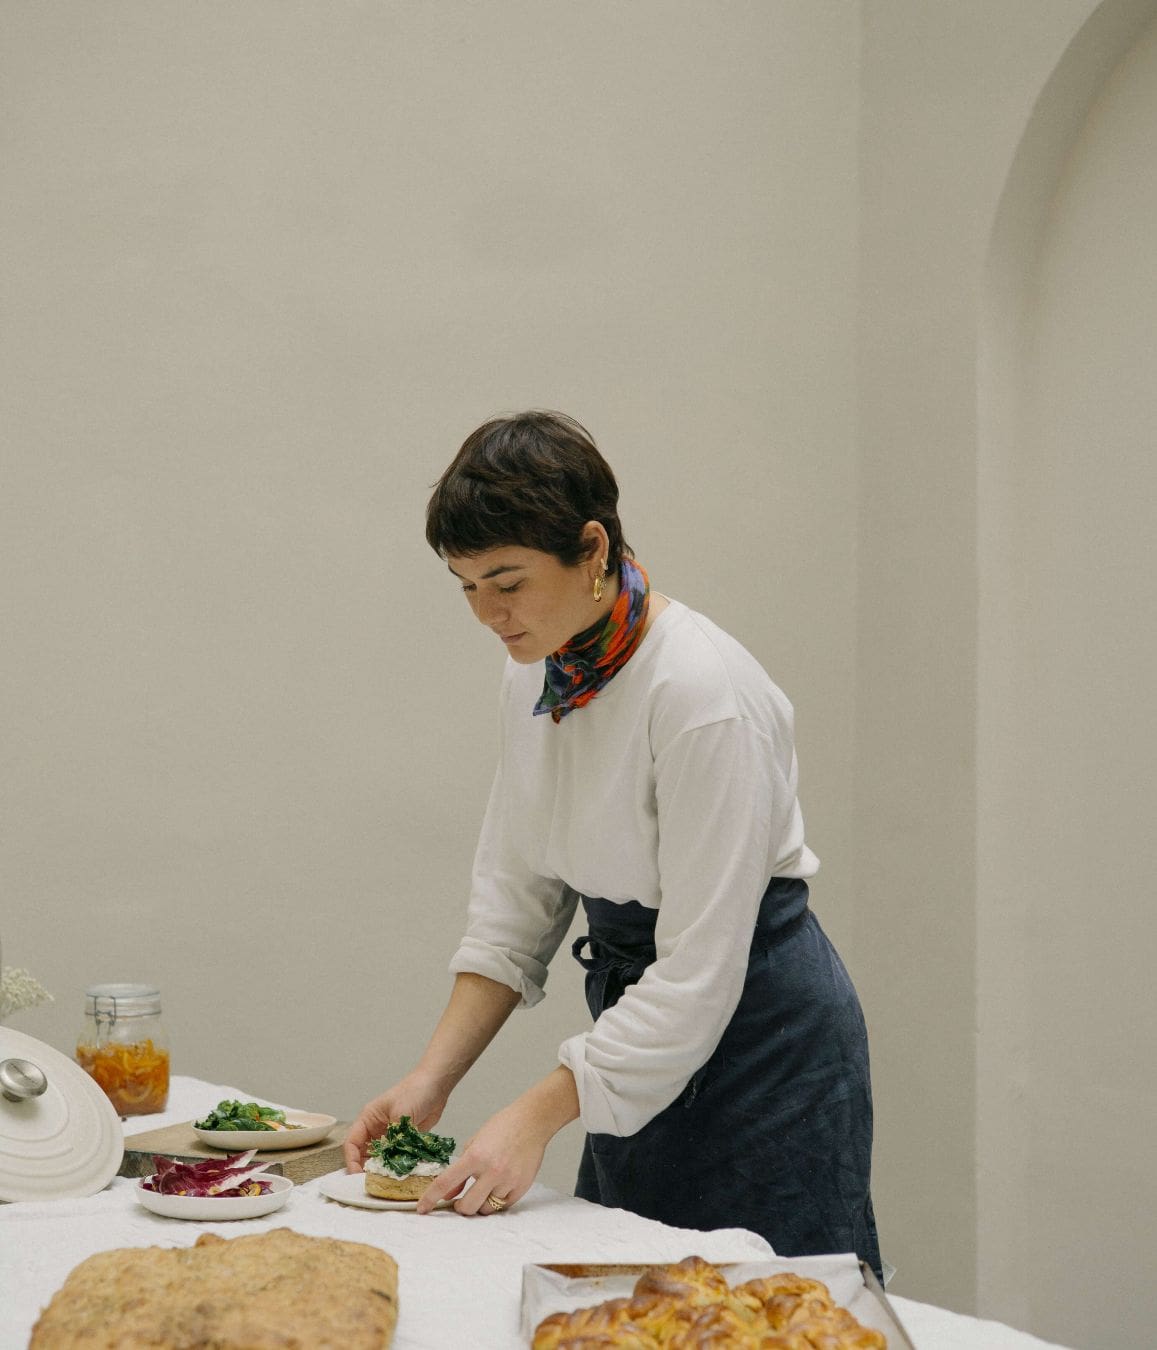 A woman resident chef plates freshly made food in a whitewashed Italian setting